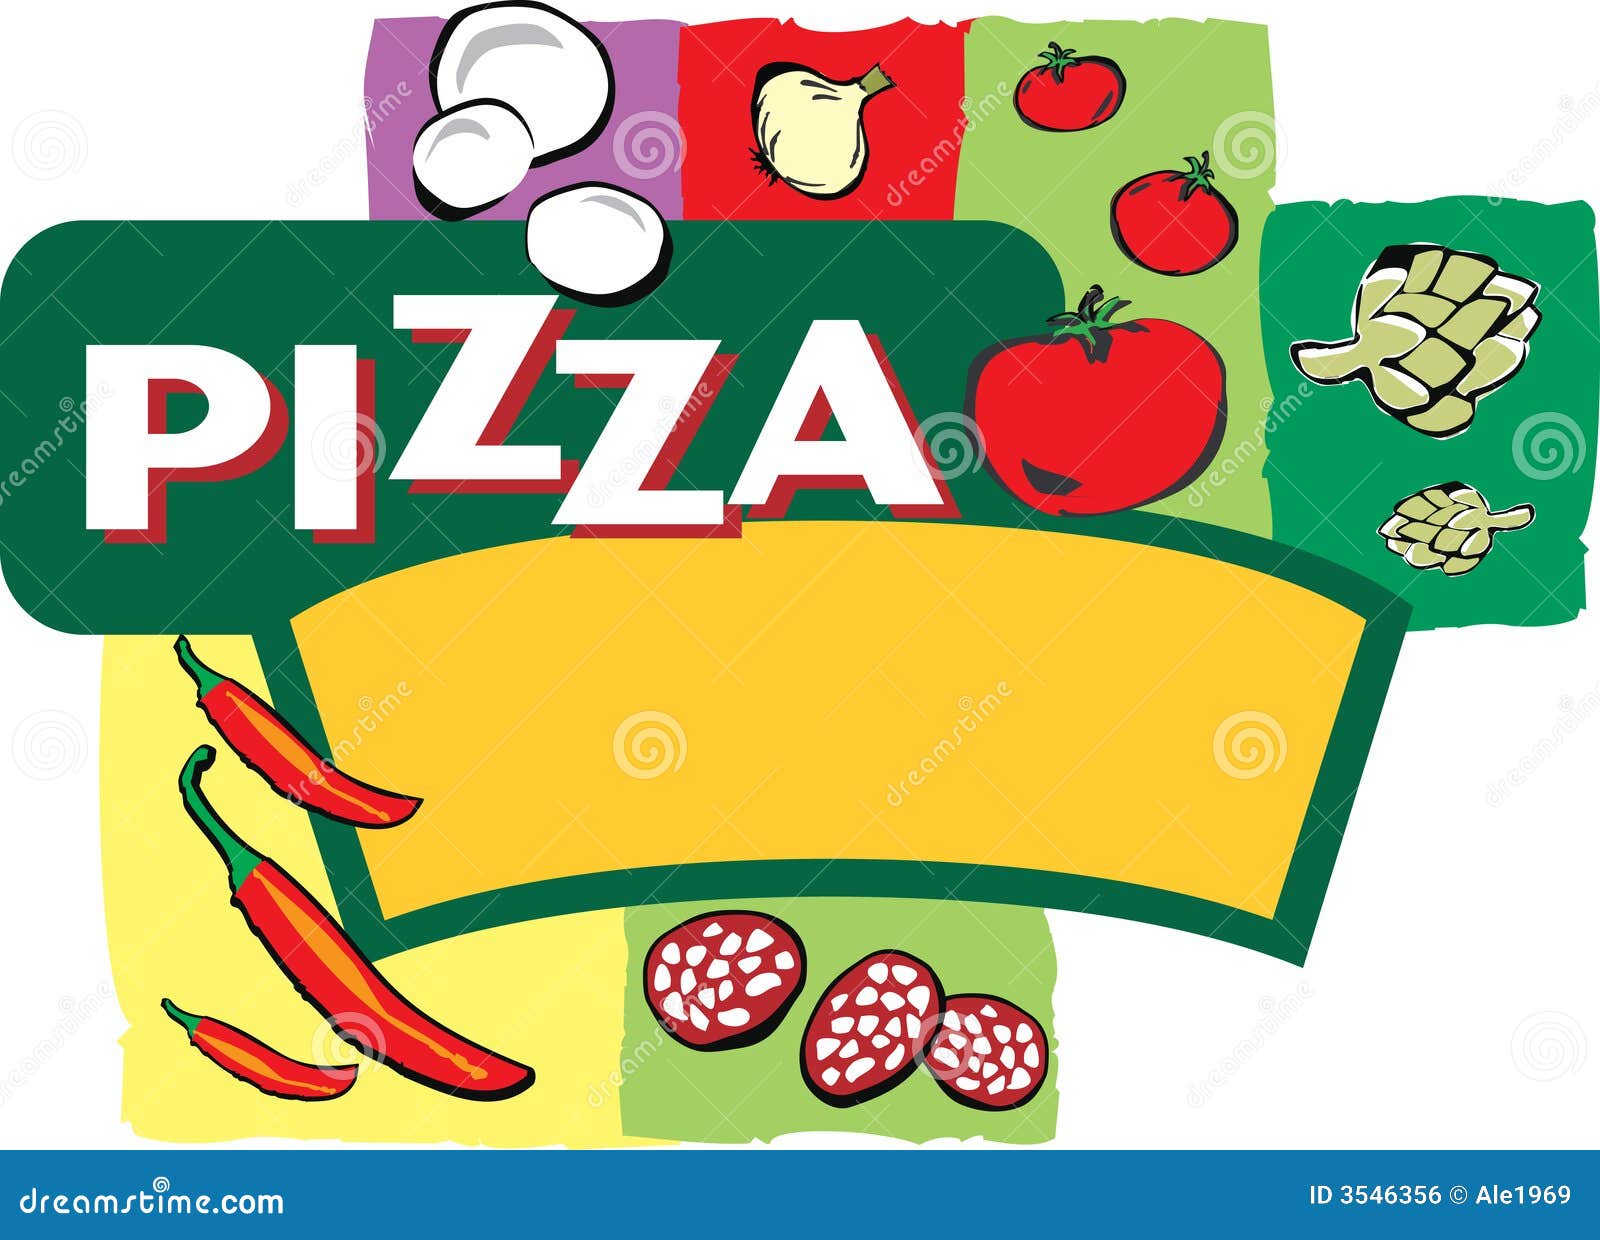 pizza ingredients clipart - photo #33